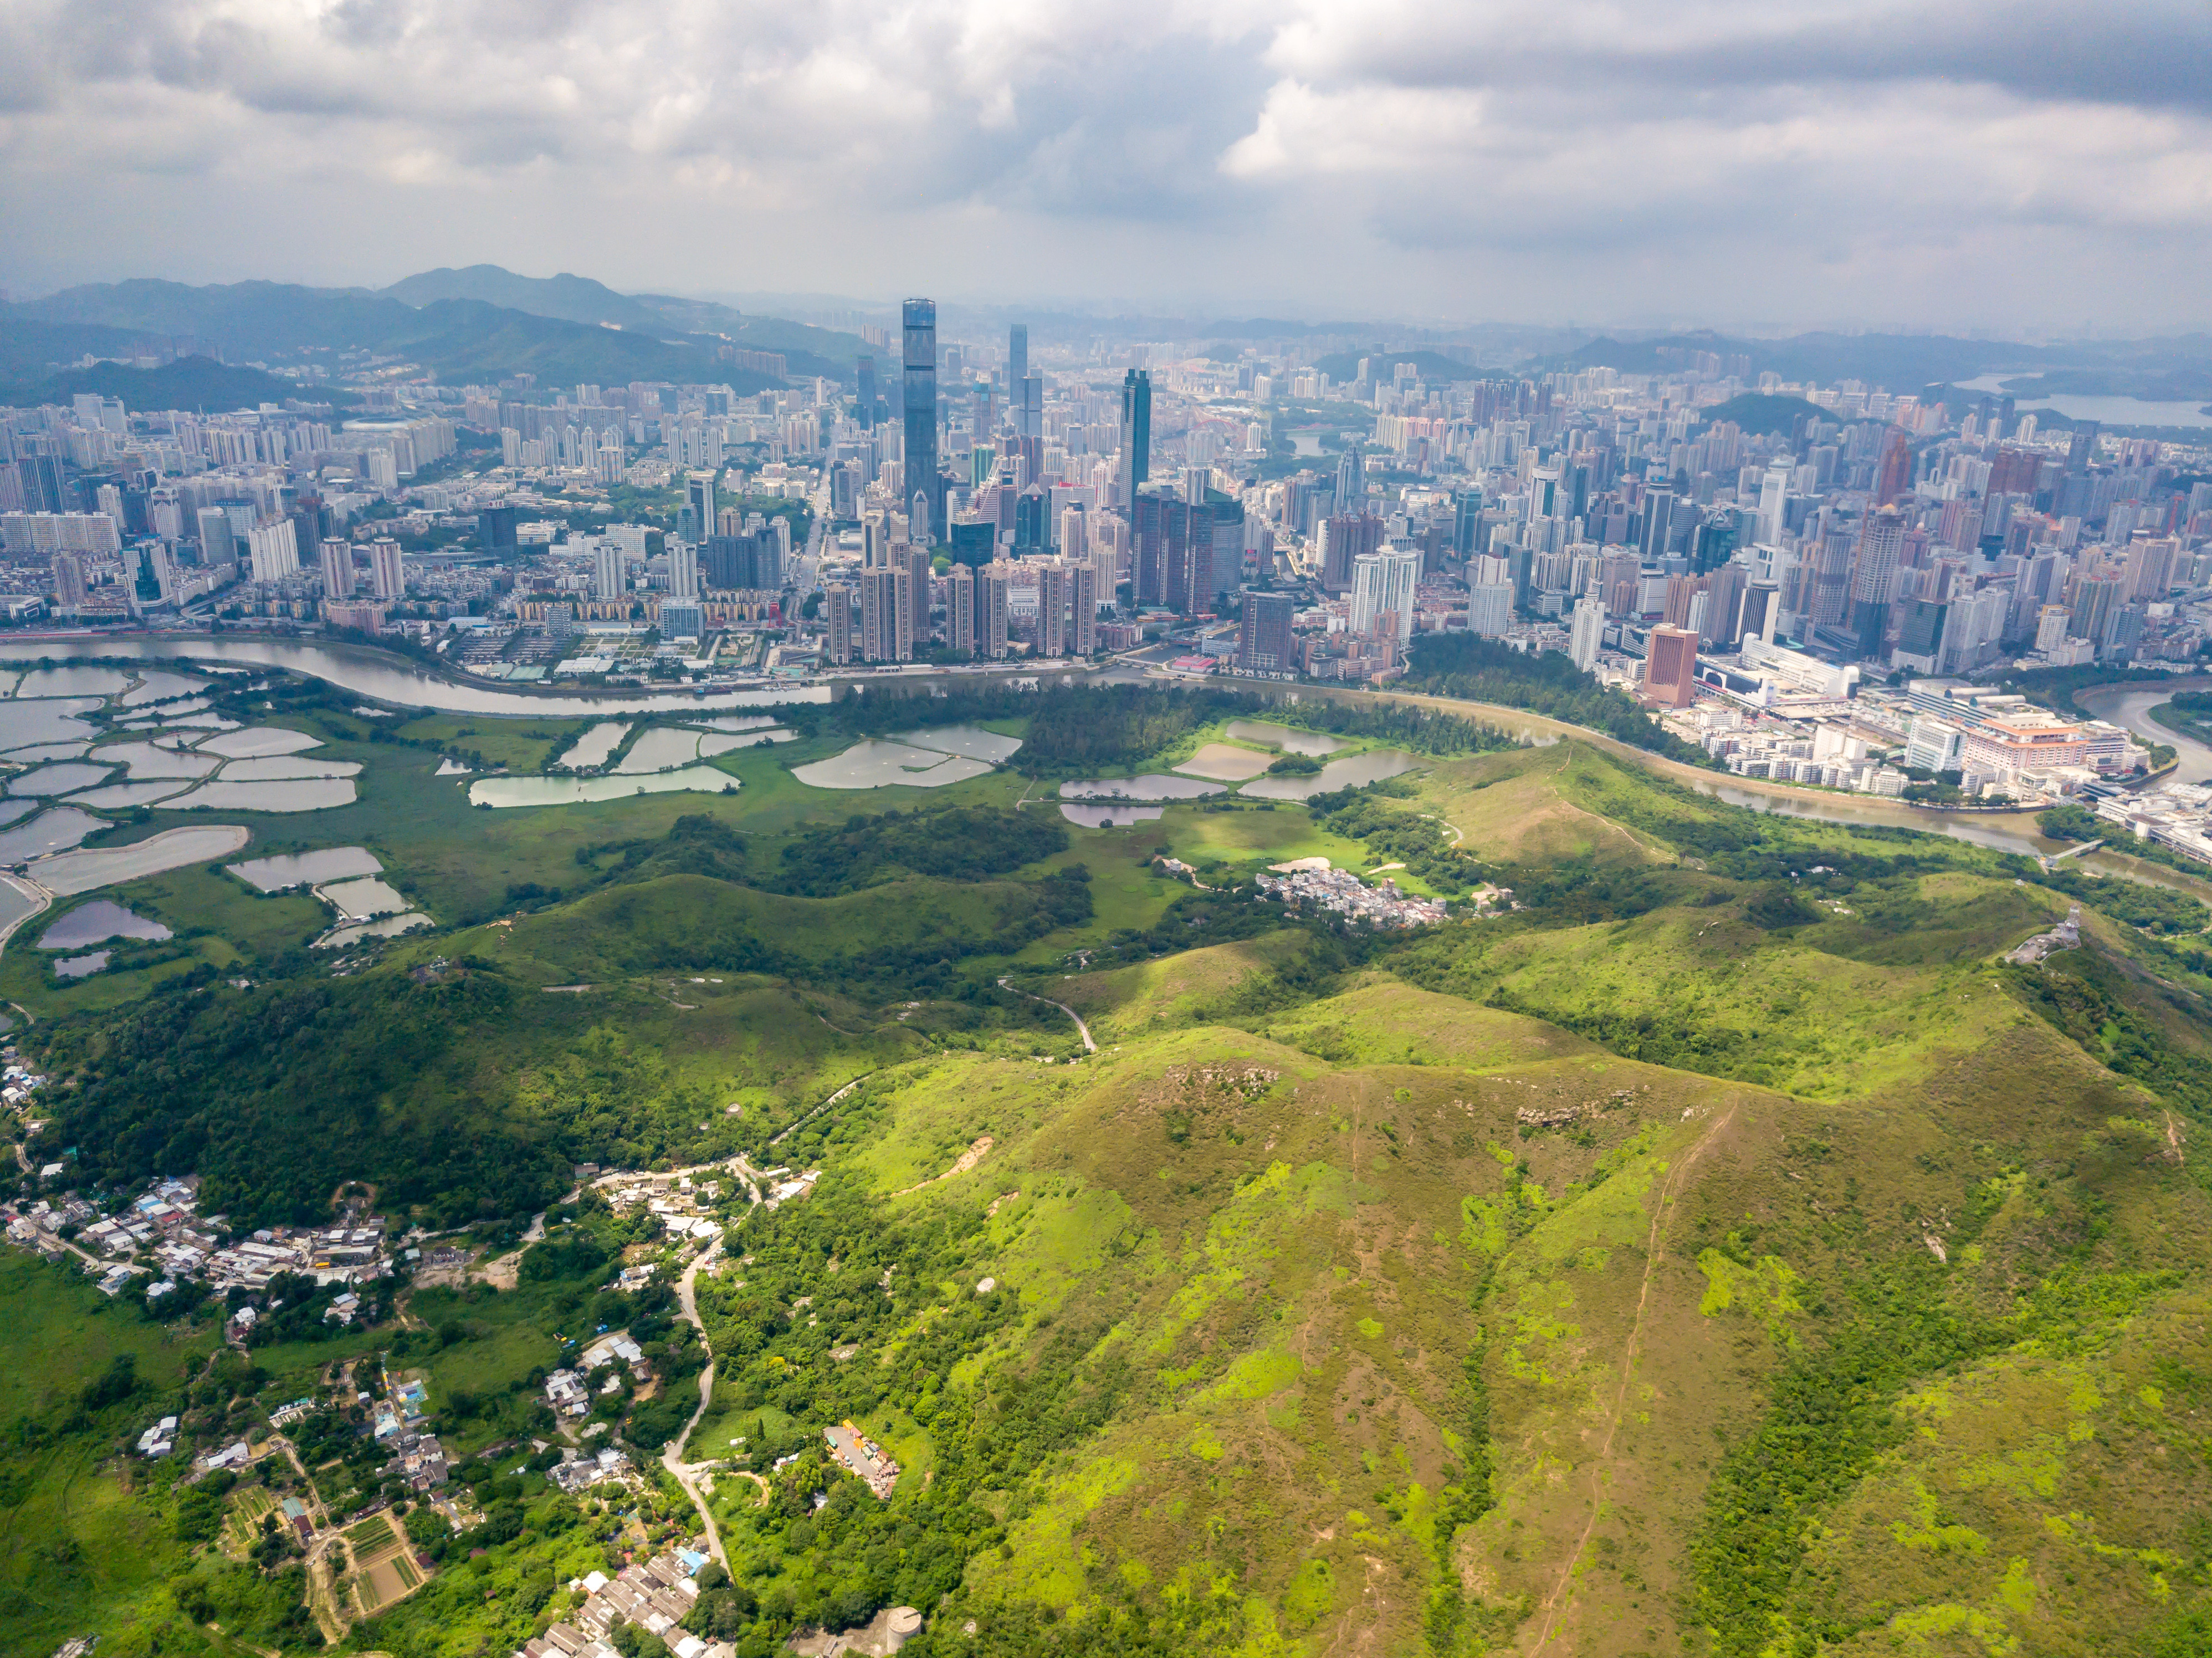 An aerial photo of the New Territories, Hong Kong. Plans are underway to create a “university town” in the area. Photo: Shutterstock